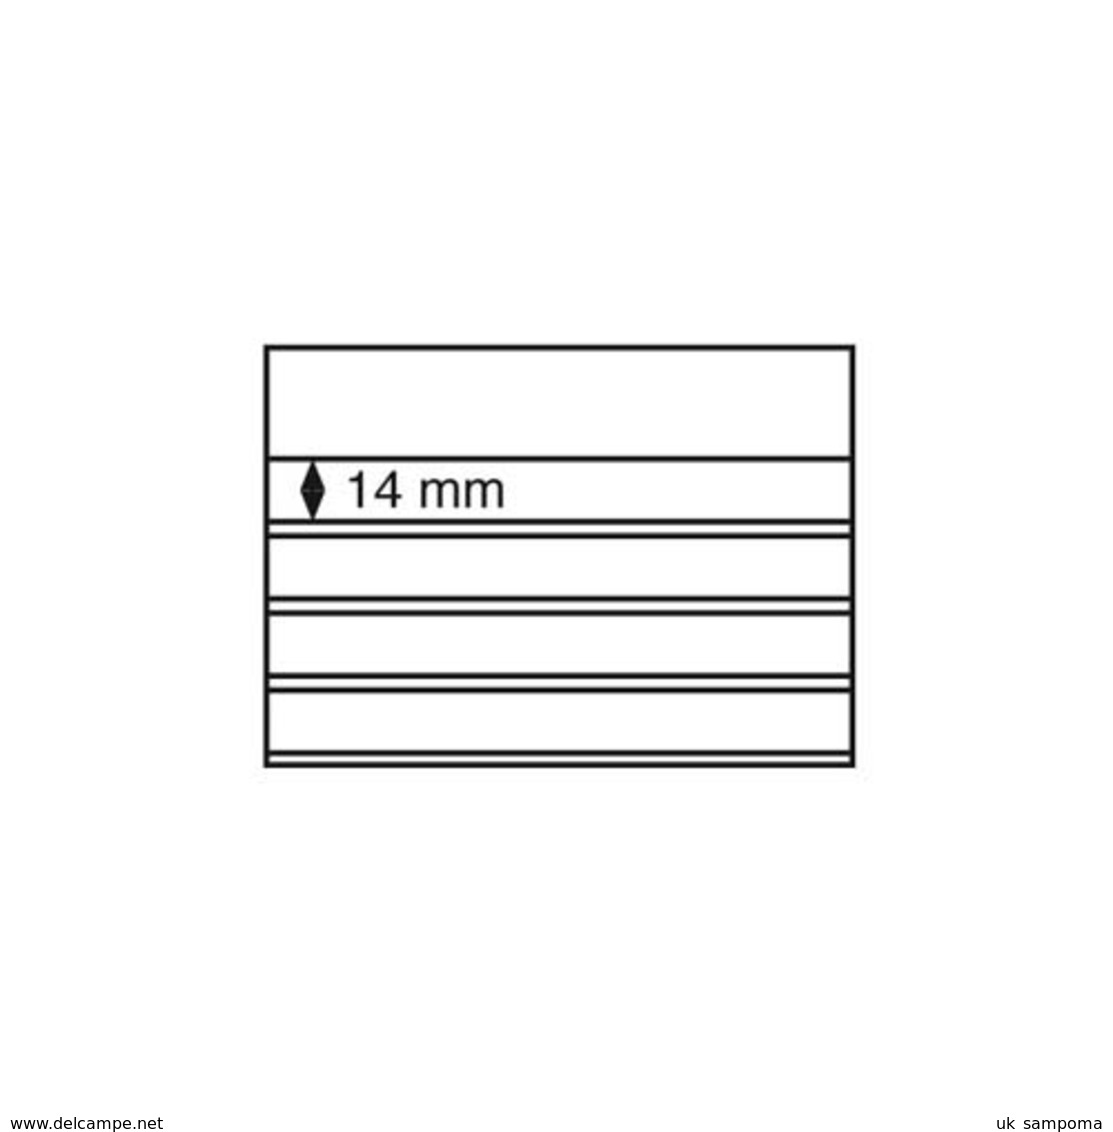 Standard Cards PVC 158x113 Mm,l4 Clear Strips With Cover Sheet, Black Card, 100 Per Pack - Etichette